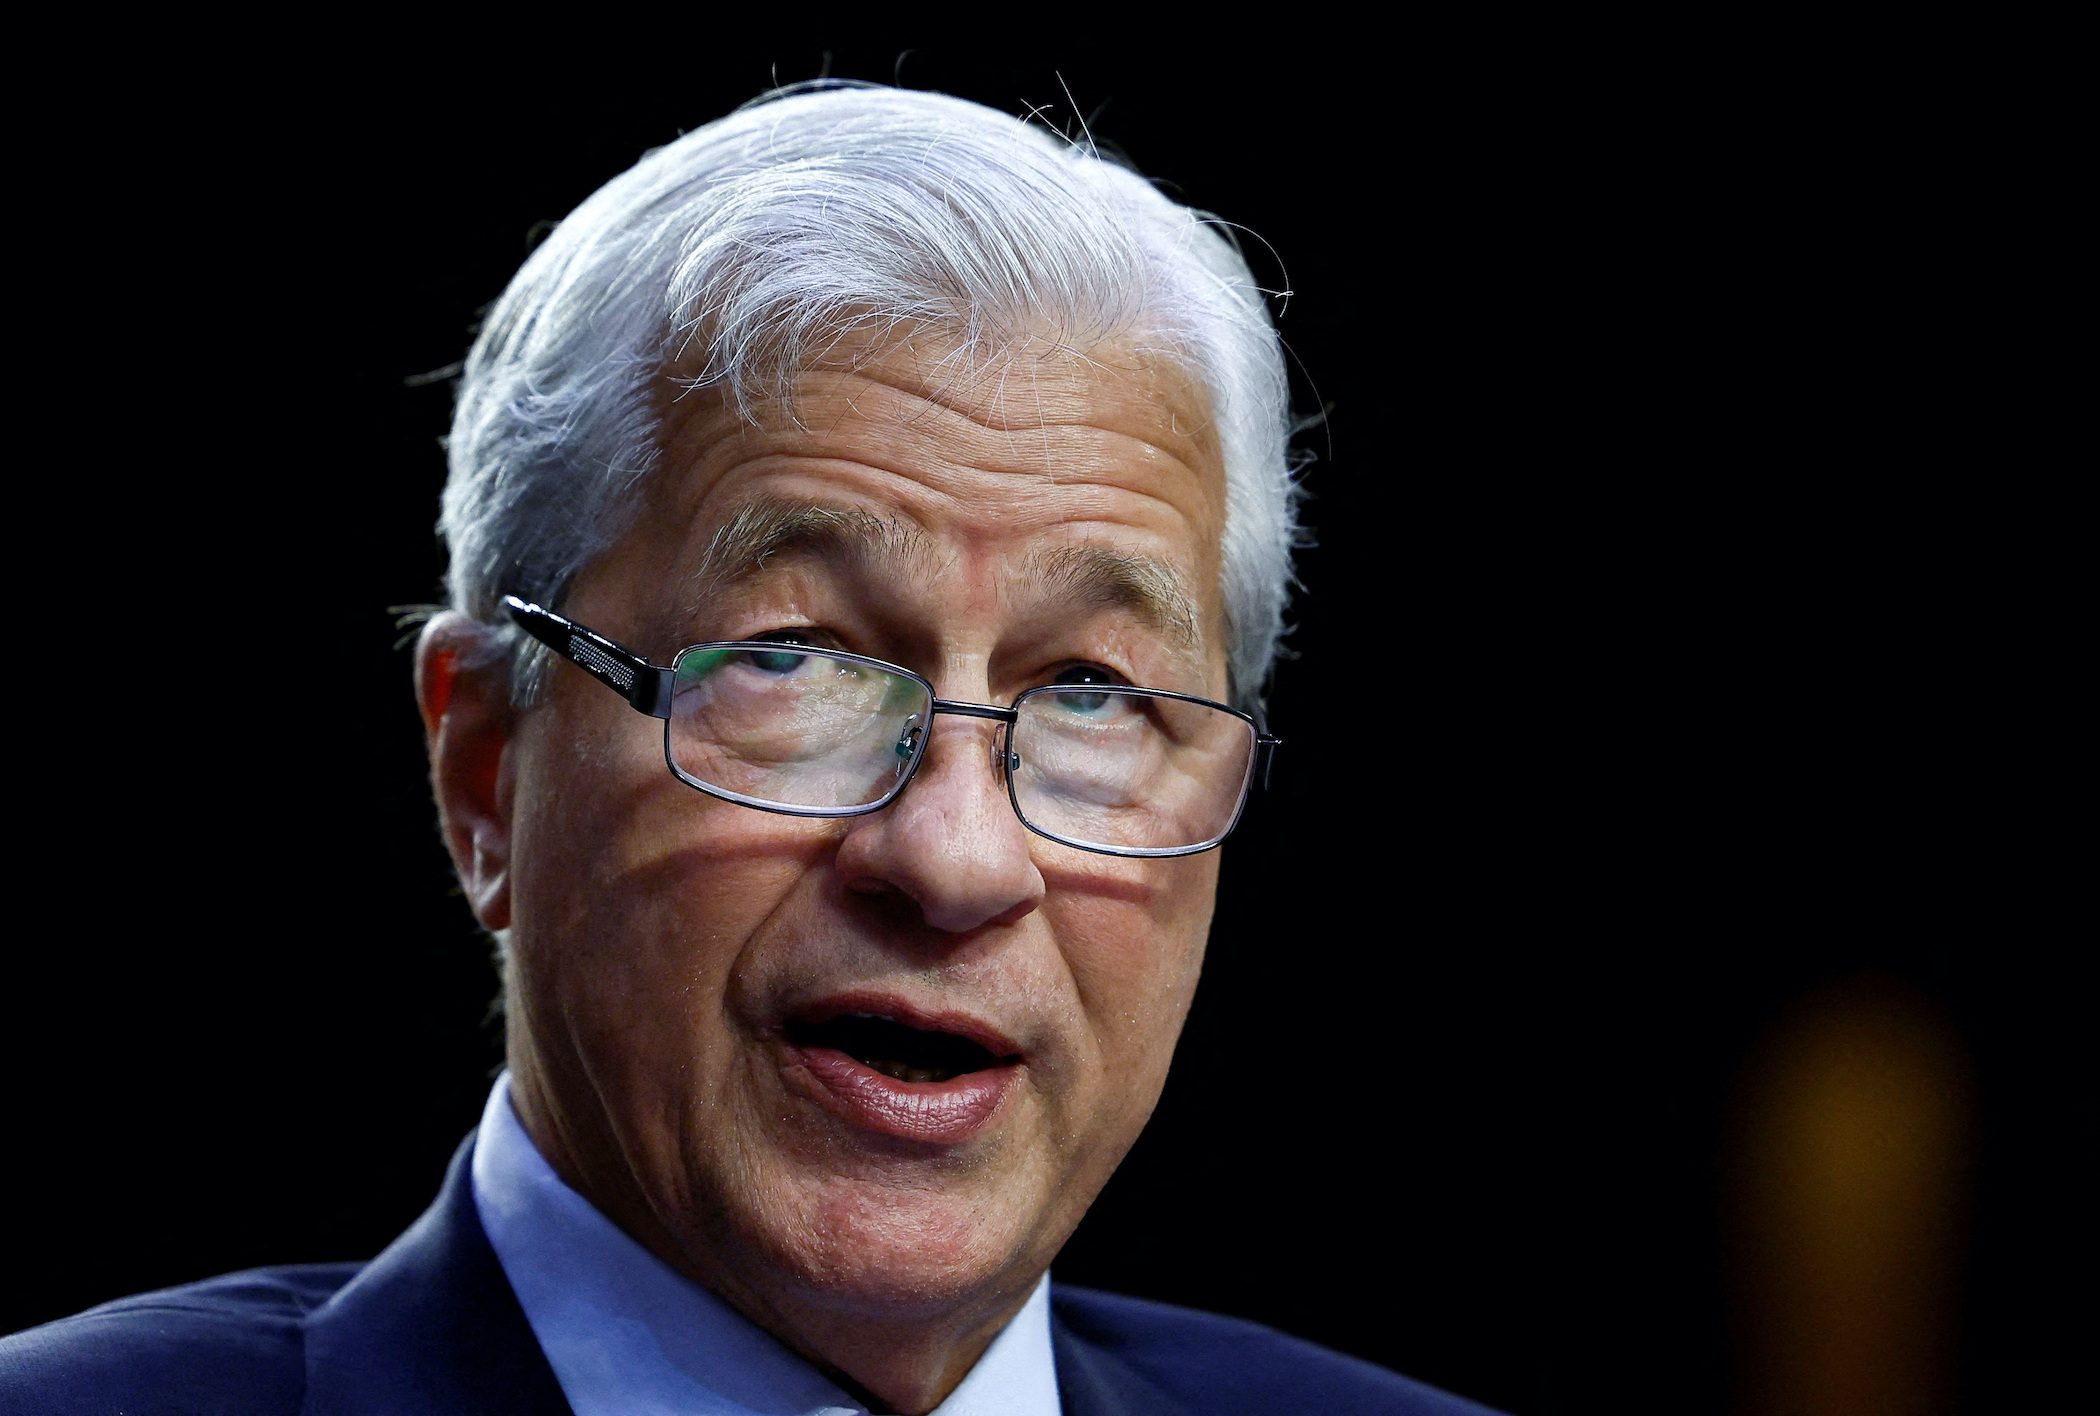 JPMorgan must hand over CEO Dimon’s records in Jeffrey Epstein lawsuit